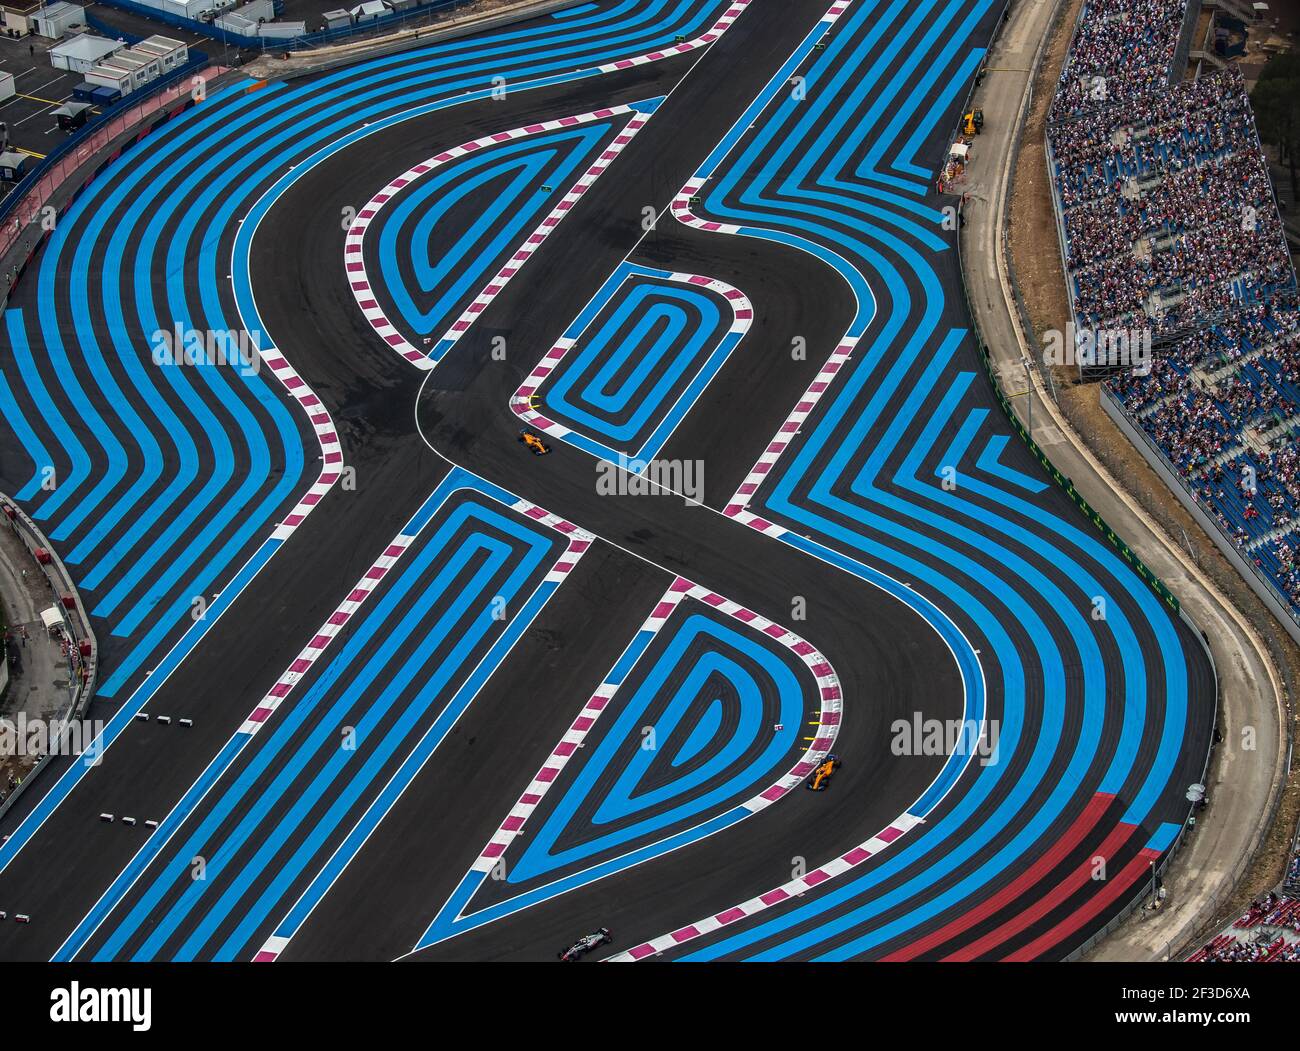 Paul ricard circuit hi-res stock photography and images - Alamy